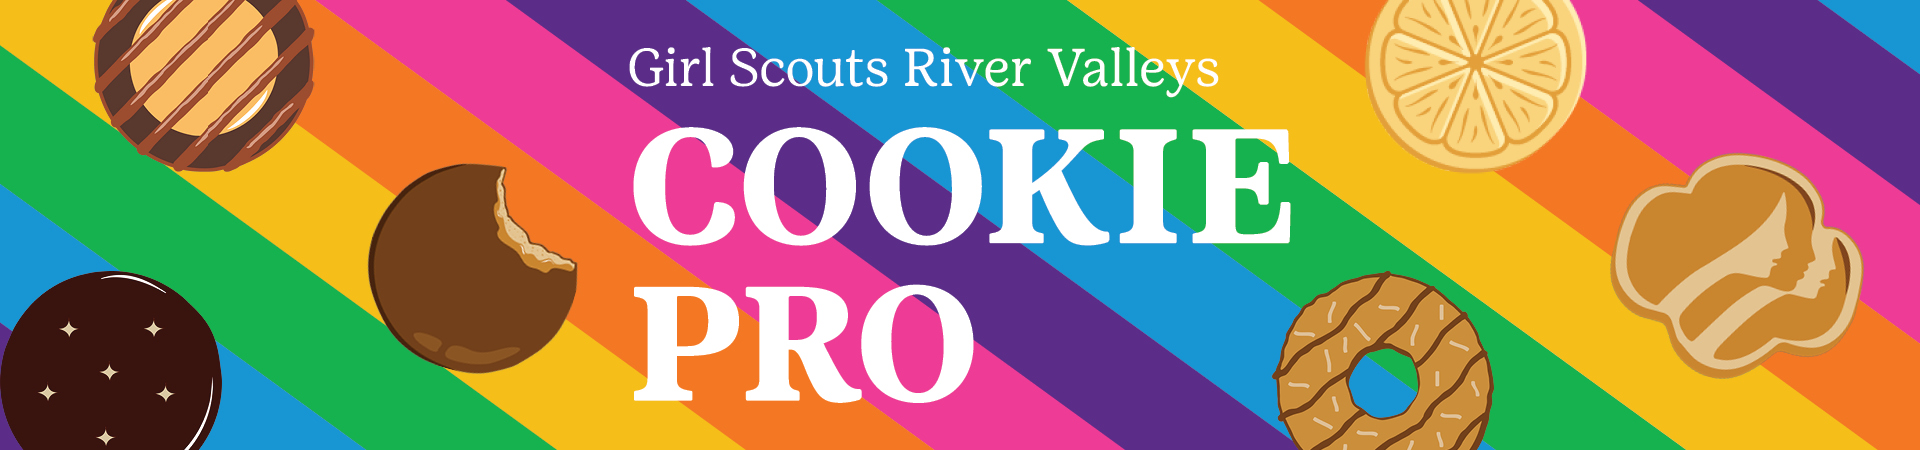  Colorful diagonally striped background with text Girl Scouts River Valleys Cookie Pro 